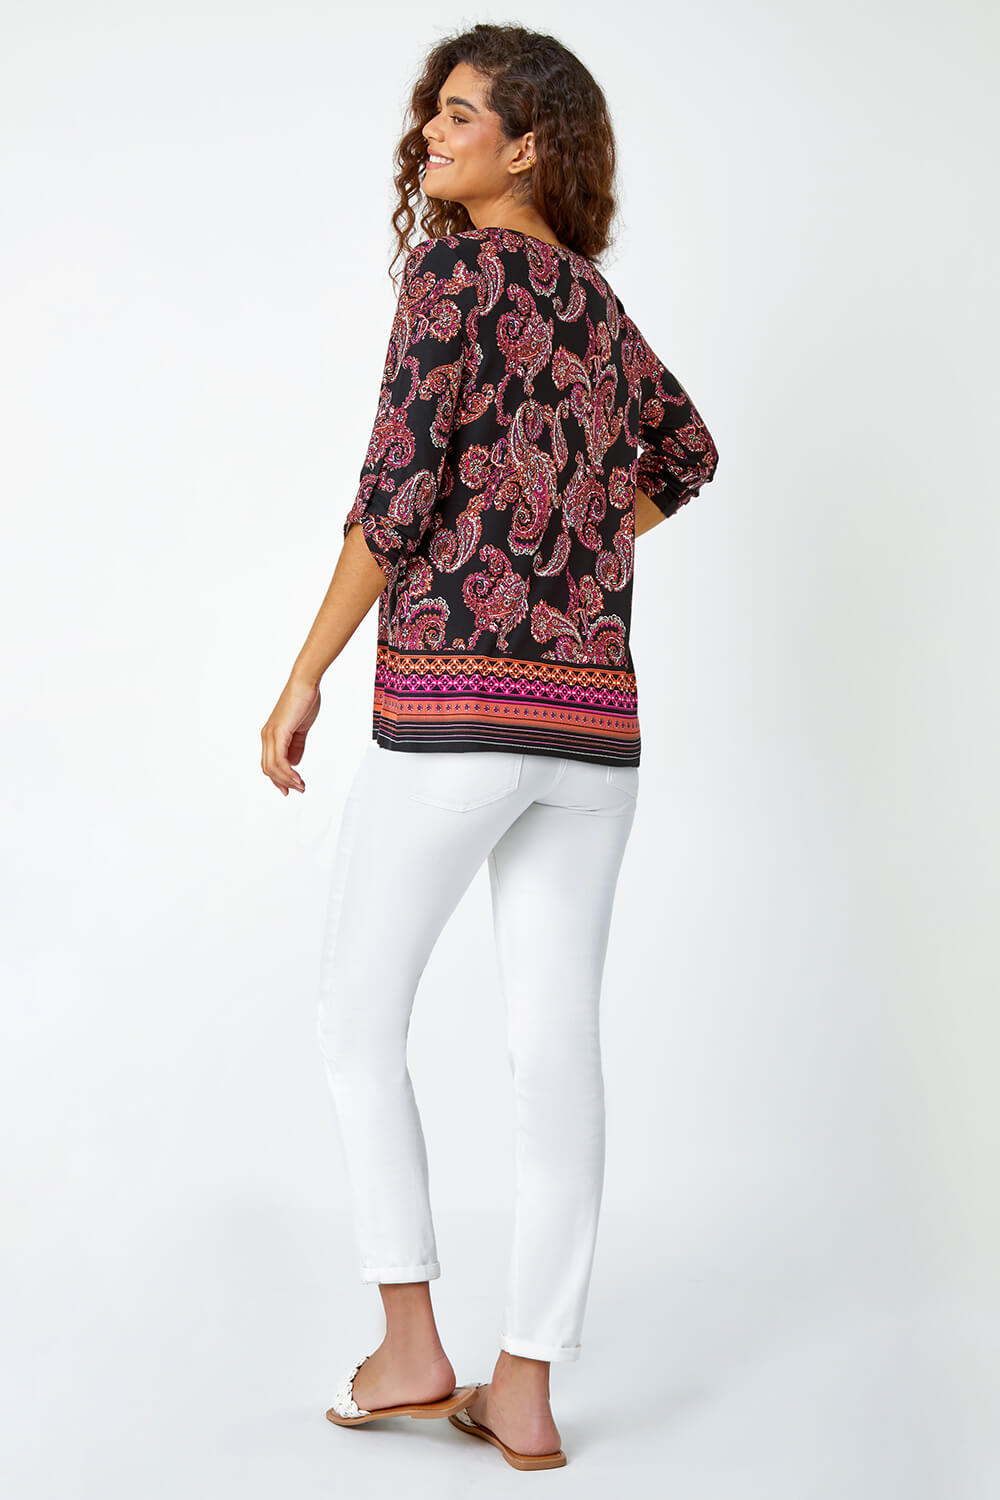 Red Paisley Border Print Tunic Stretch Top, Image 3 of 5